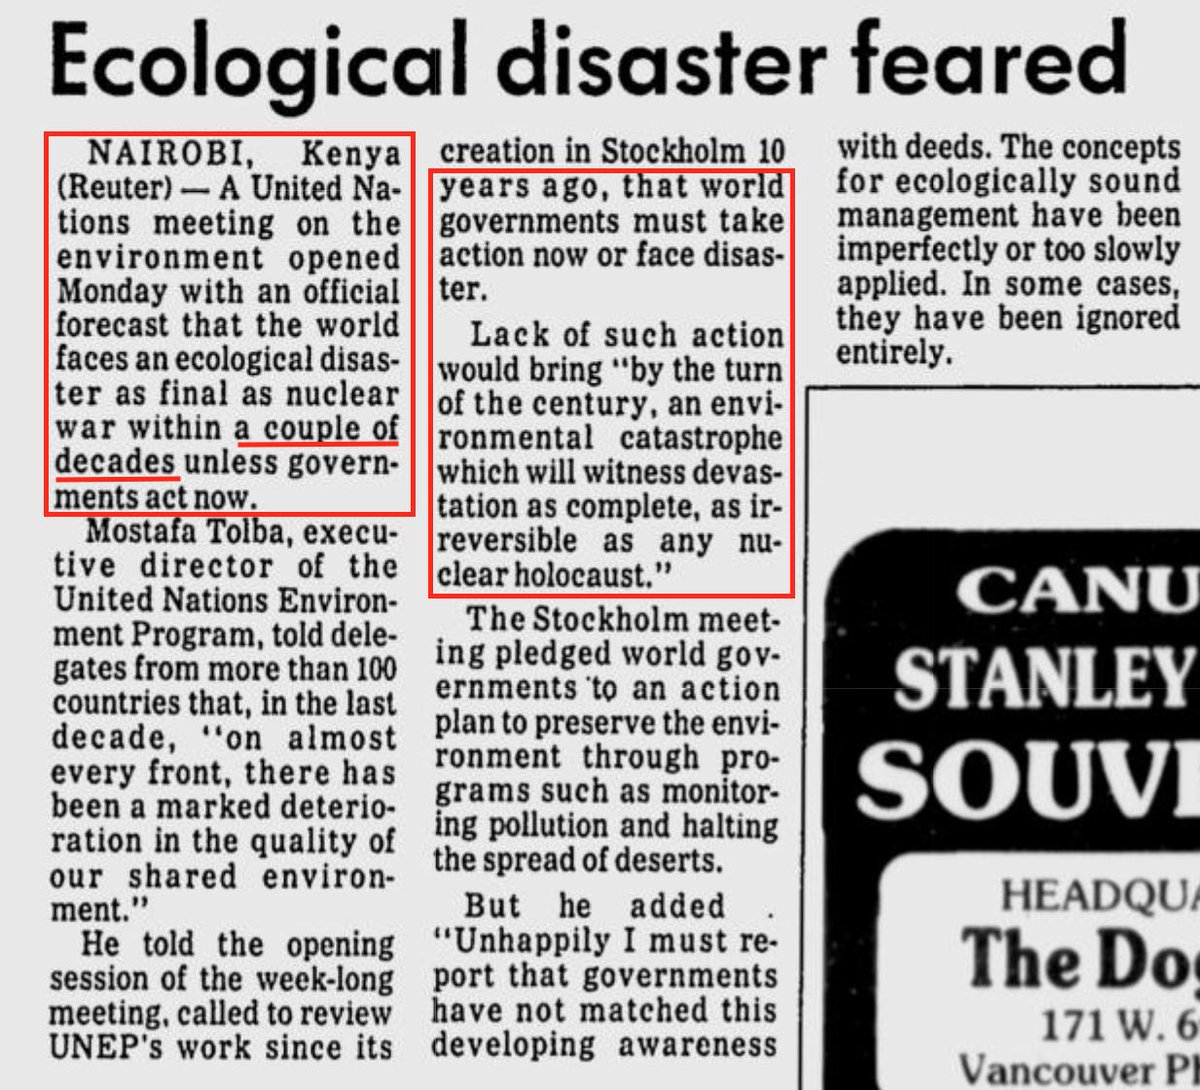 26. Nevertheless, by 1982, according to the media and the UN, the world faced an environmental catastrophe with devastation as great as nuclear holocaust within 2 decades "unless governments act NOW." https://news.google.com/newspapers?id=o5tlAAAAIBAJ&sjid=TYwNAAAAIBAJ&dq=ecological%20holocaust&pg=5103%2C351973